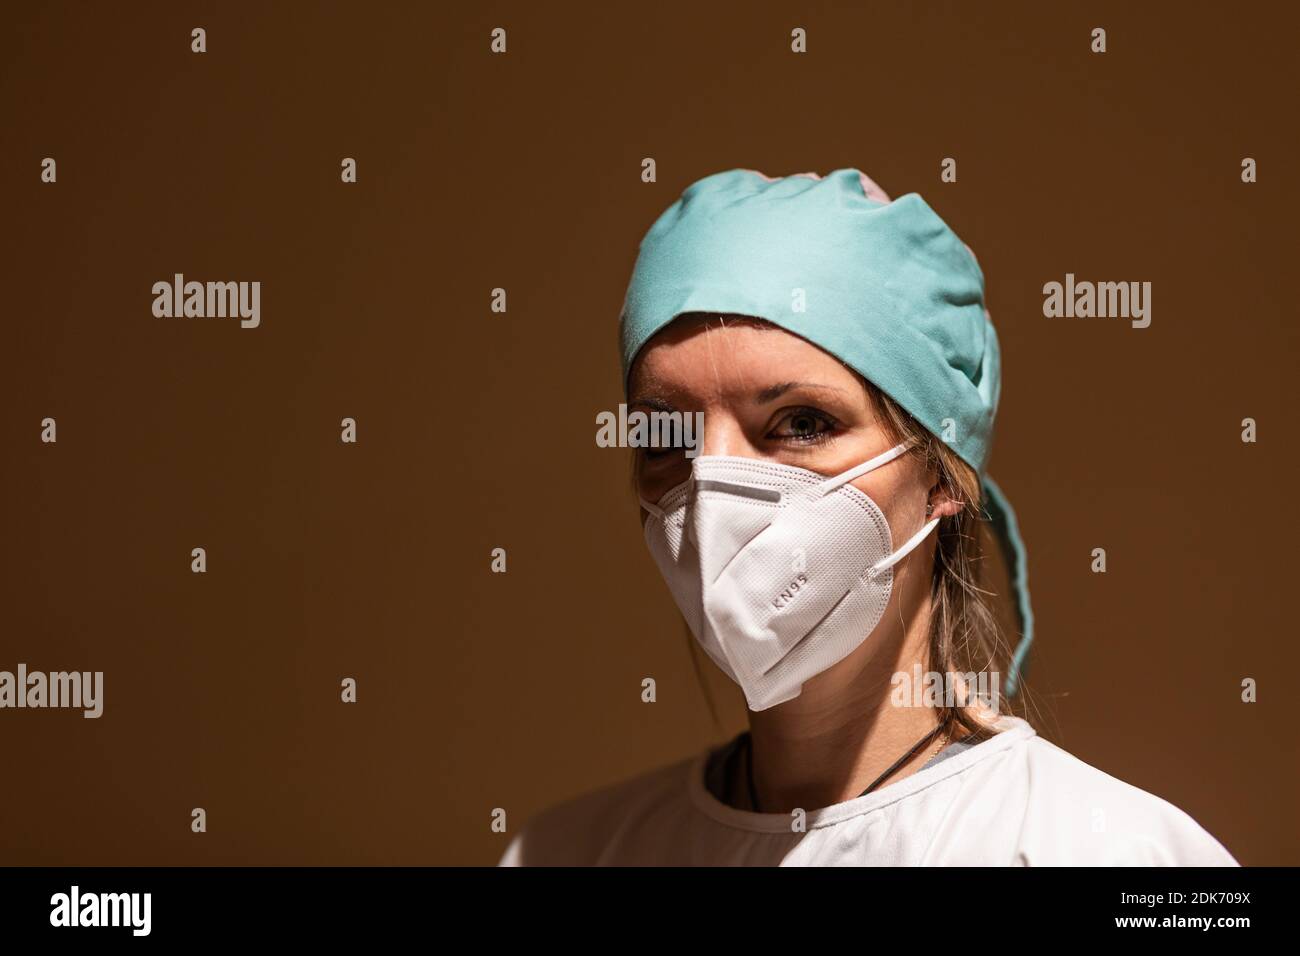 nurse camera look with surgical cyan cap, surgical gown and white mask coronavirus pandemic protection Stock Photo